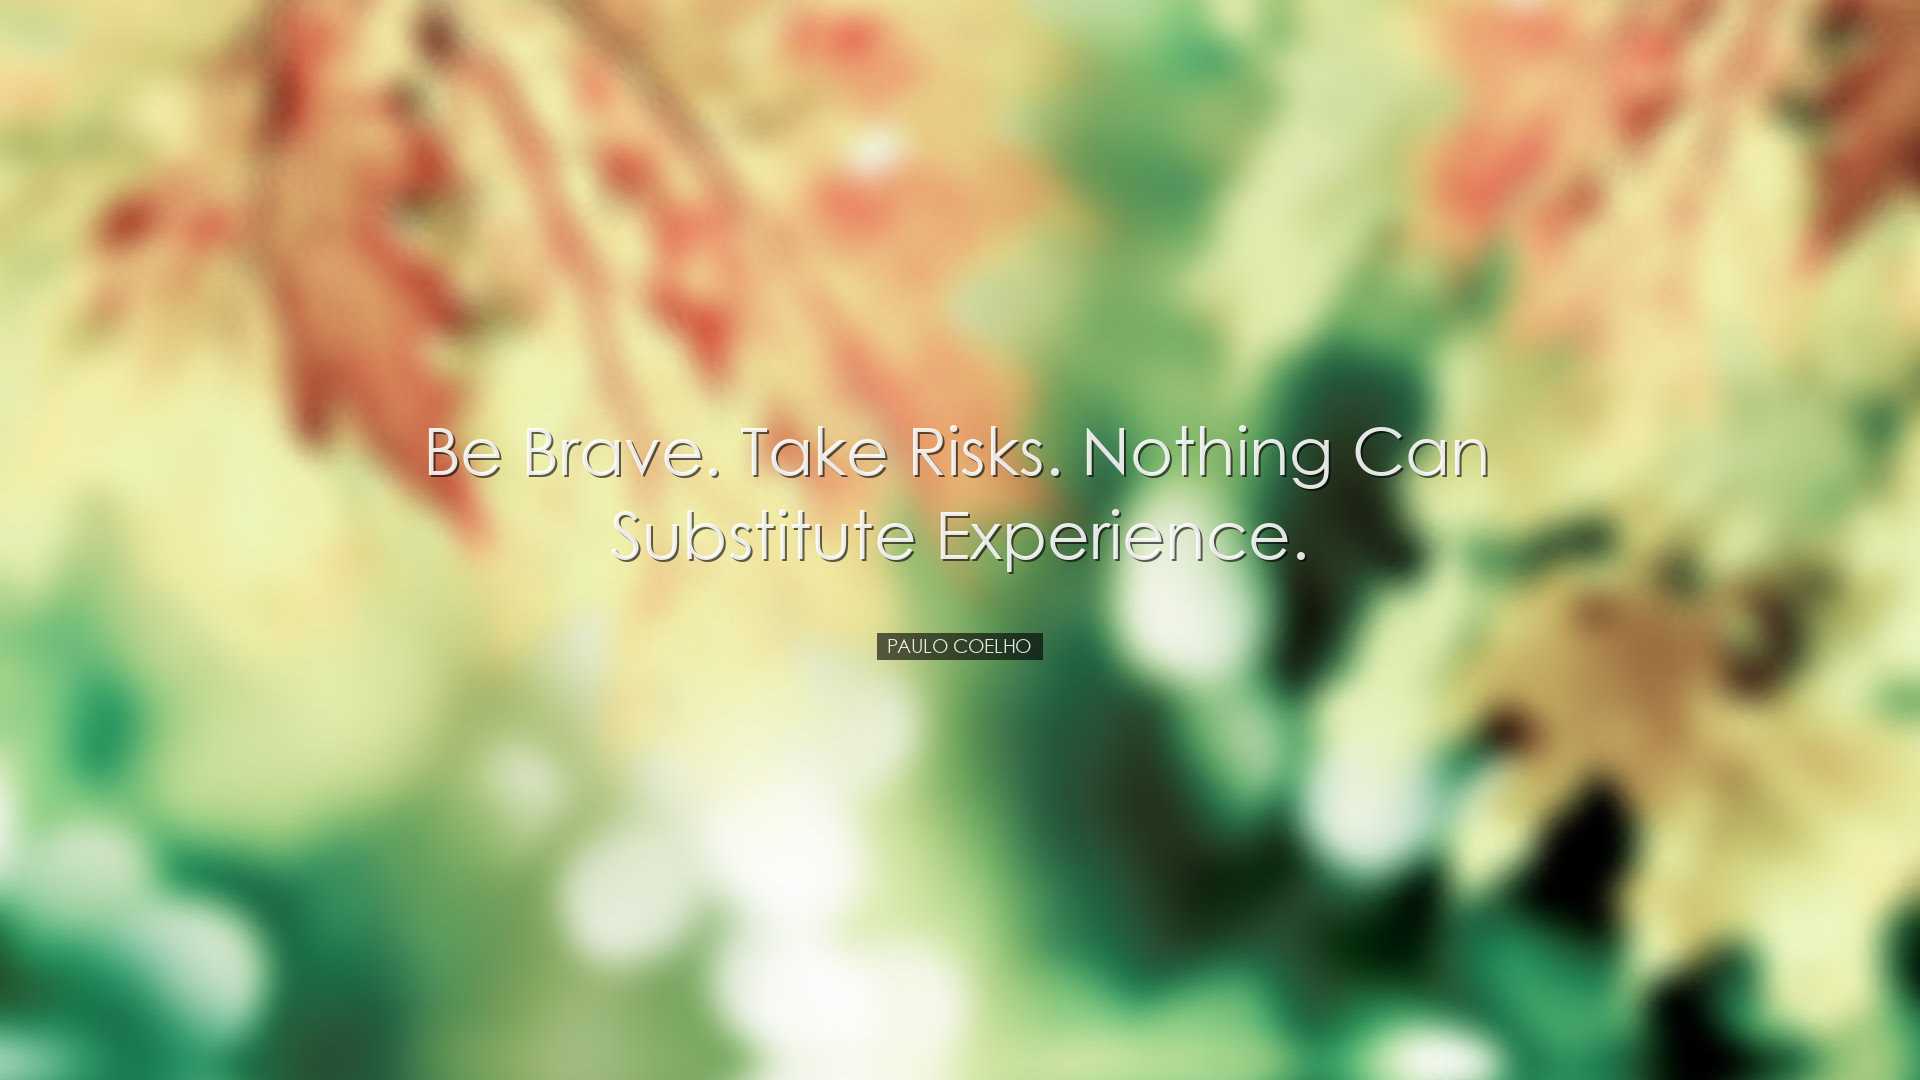 Be brave. Take risks. Nothing can substitute experience. - Paulo C